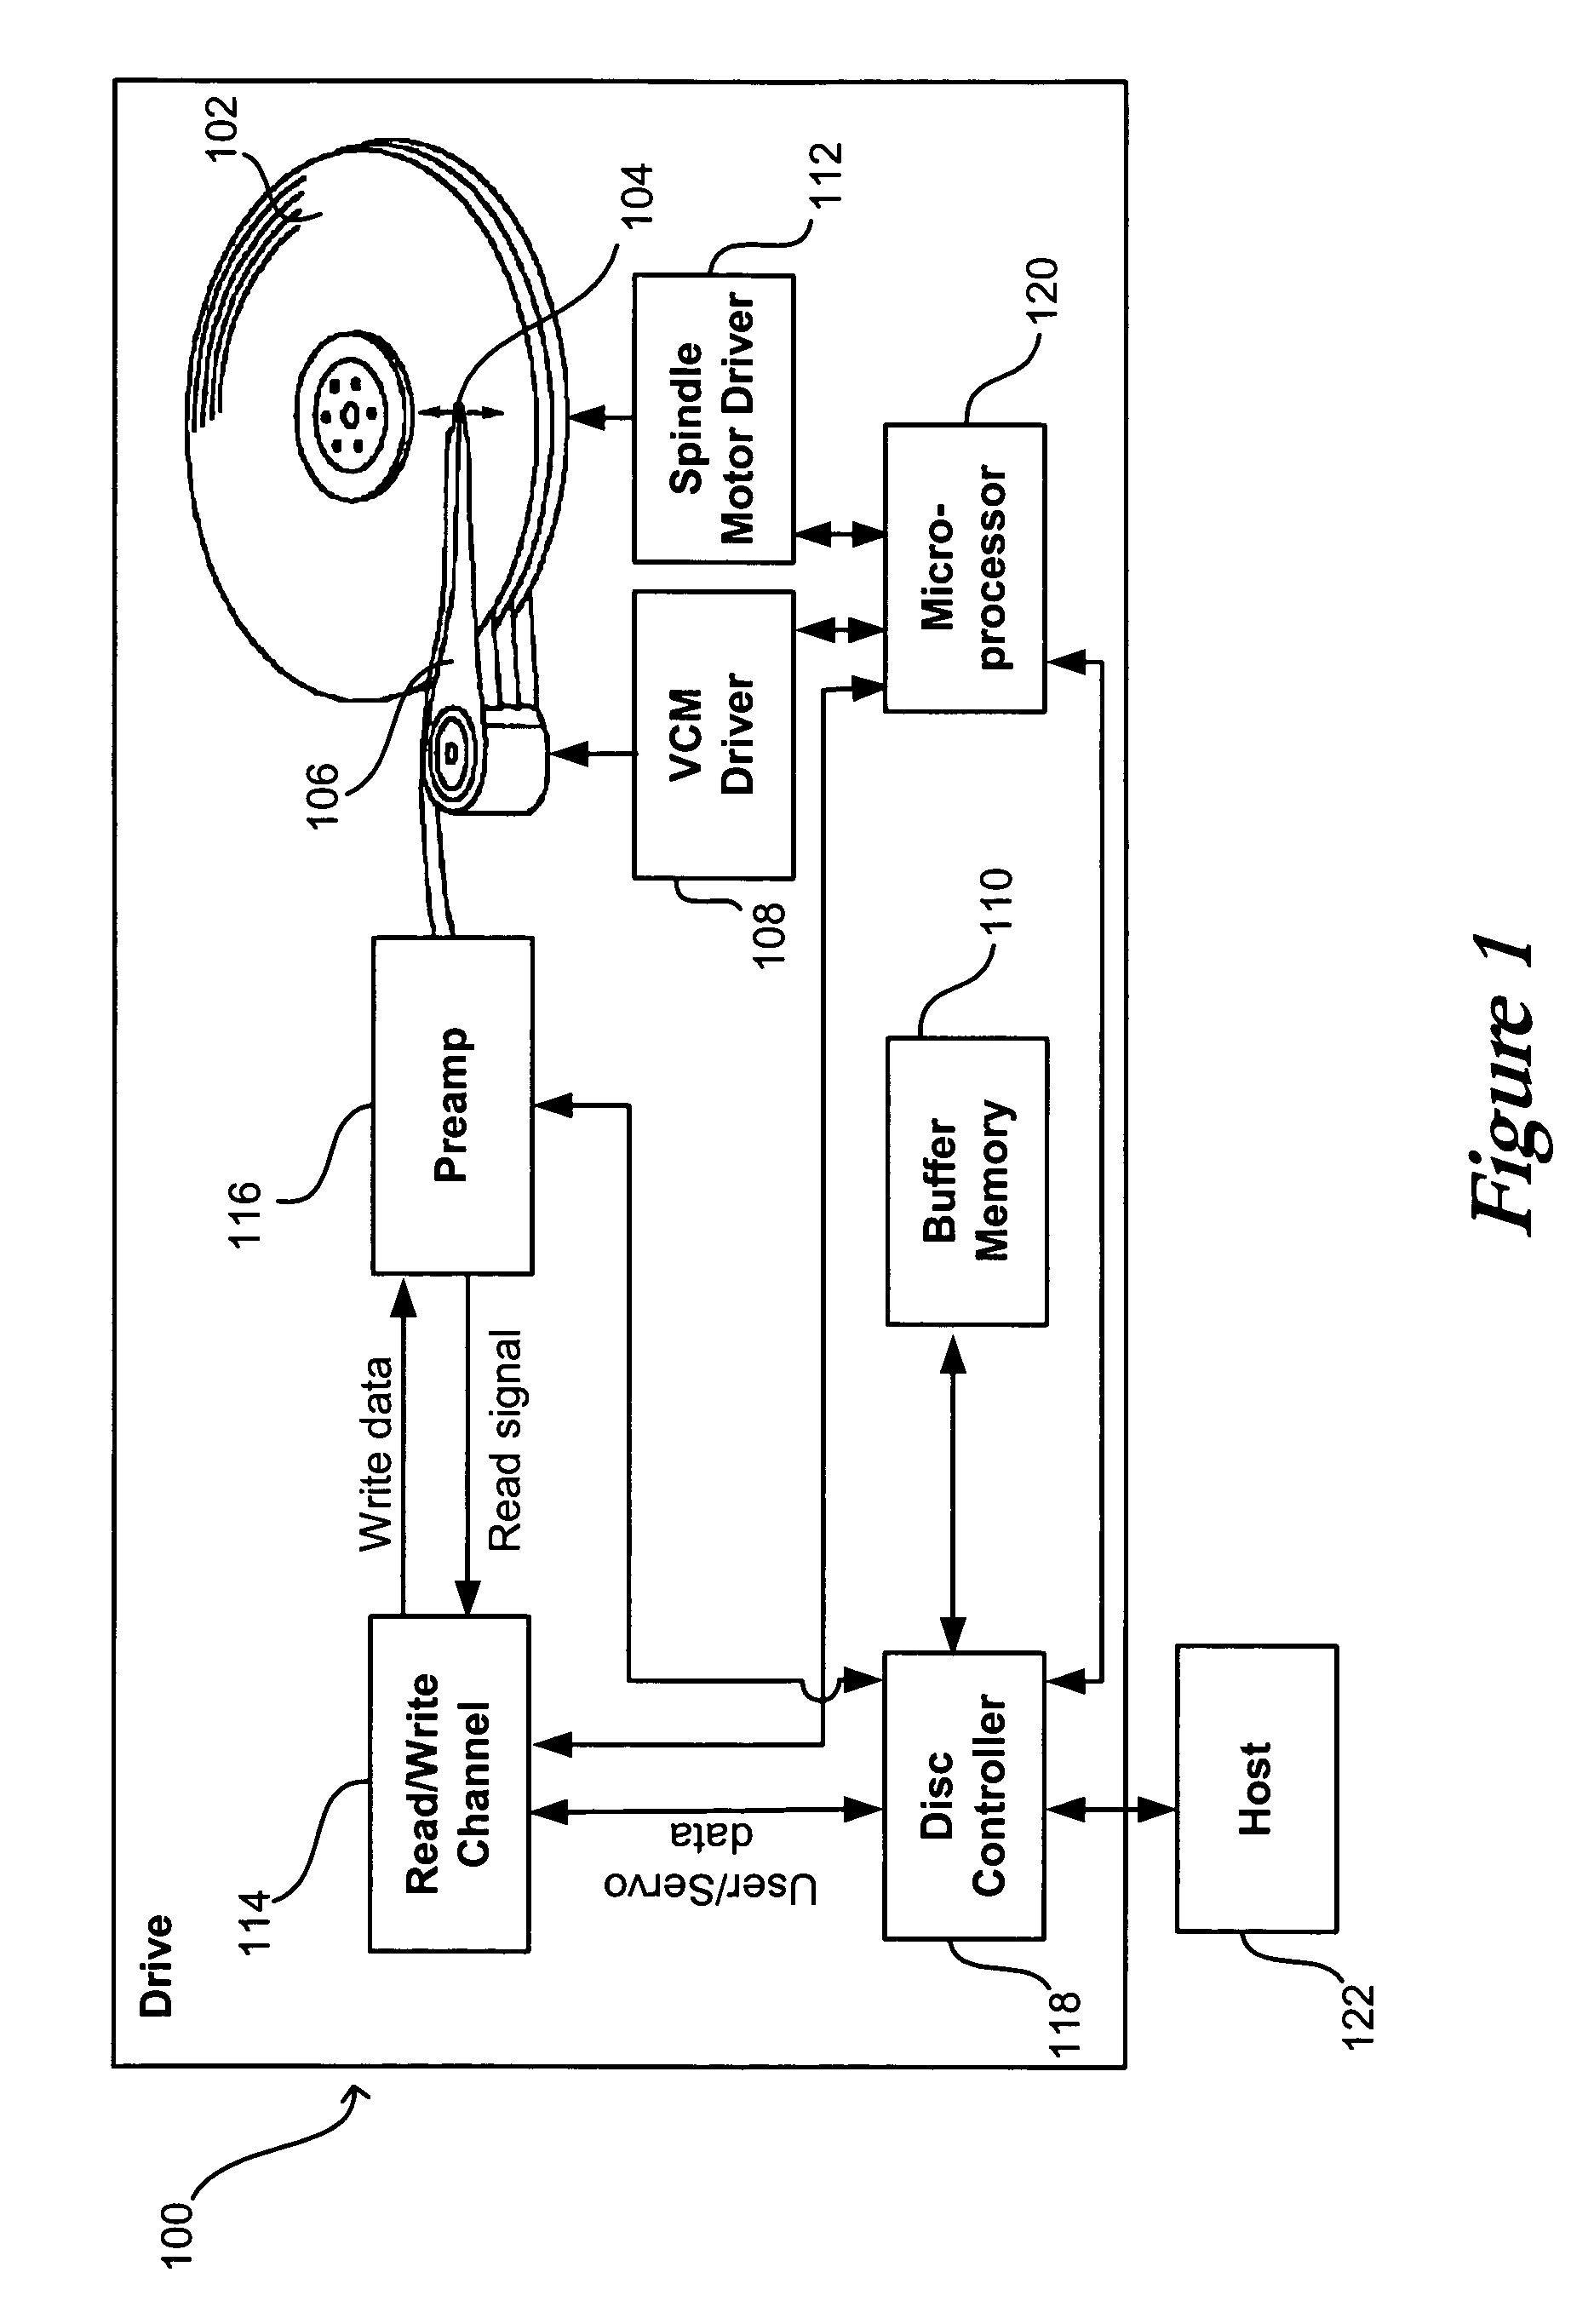 Methods for self-servowriting with multiple passes per servowriting step